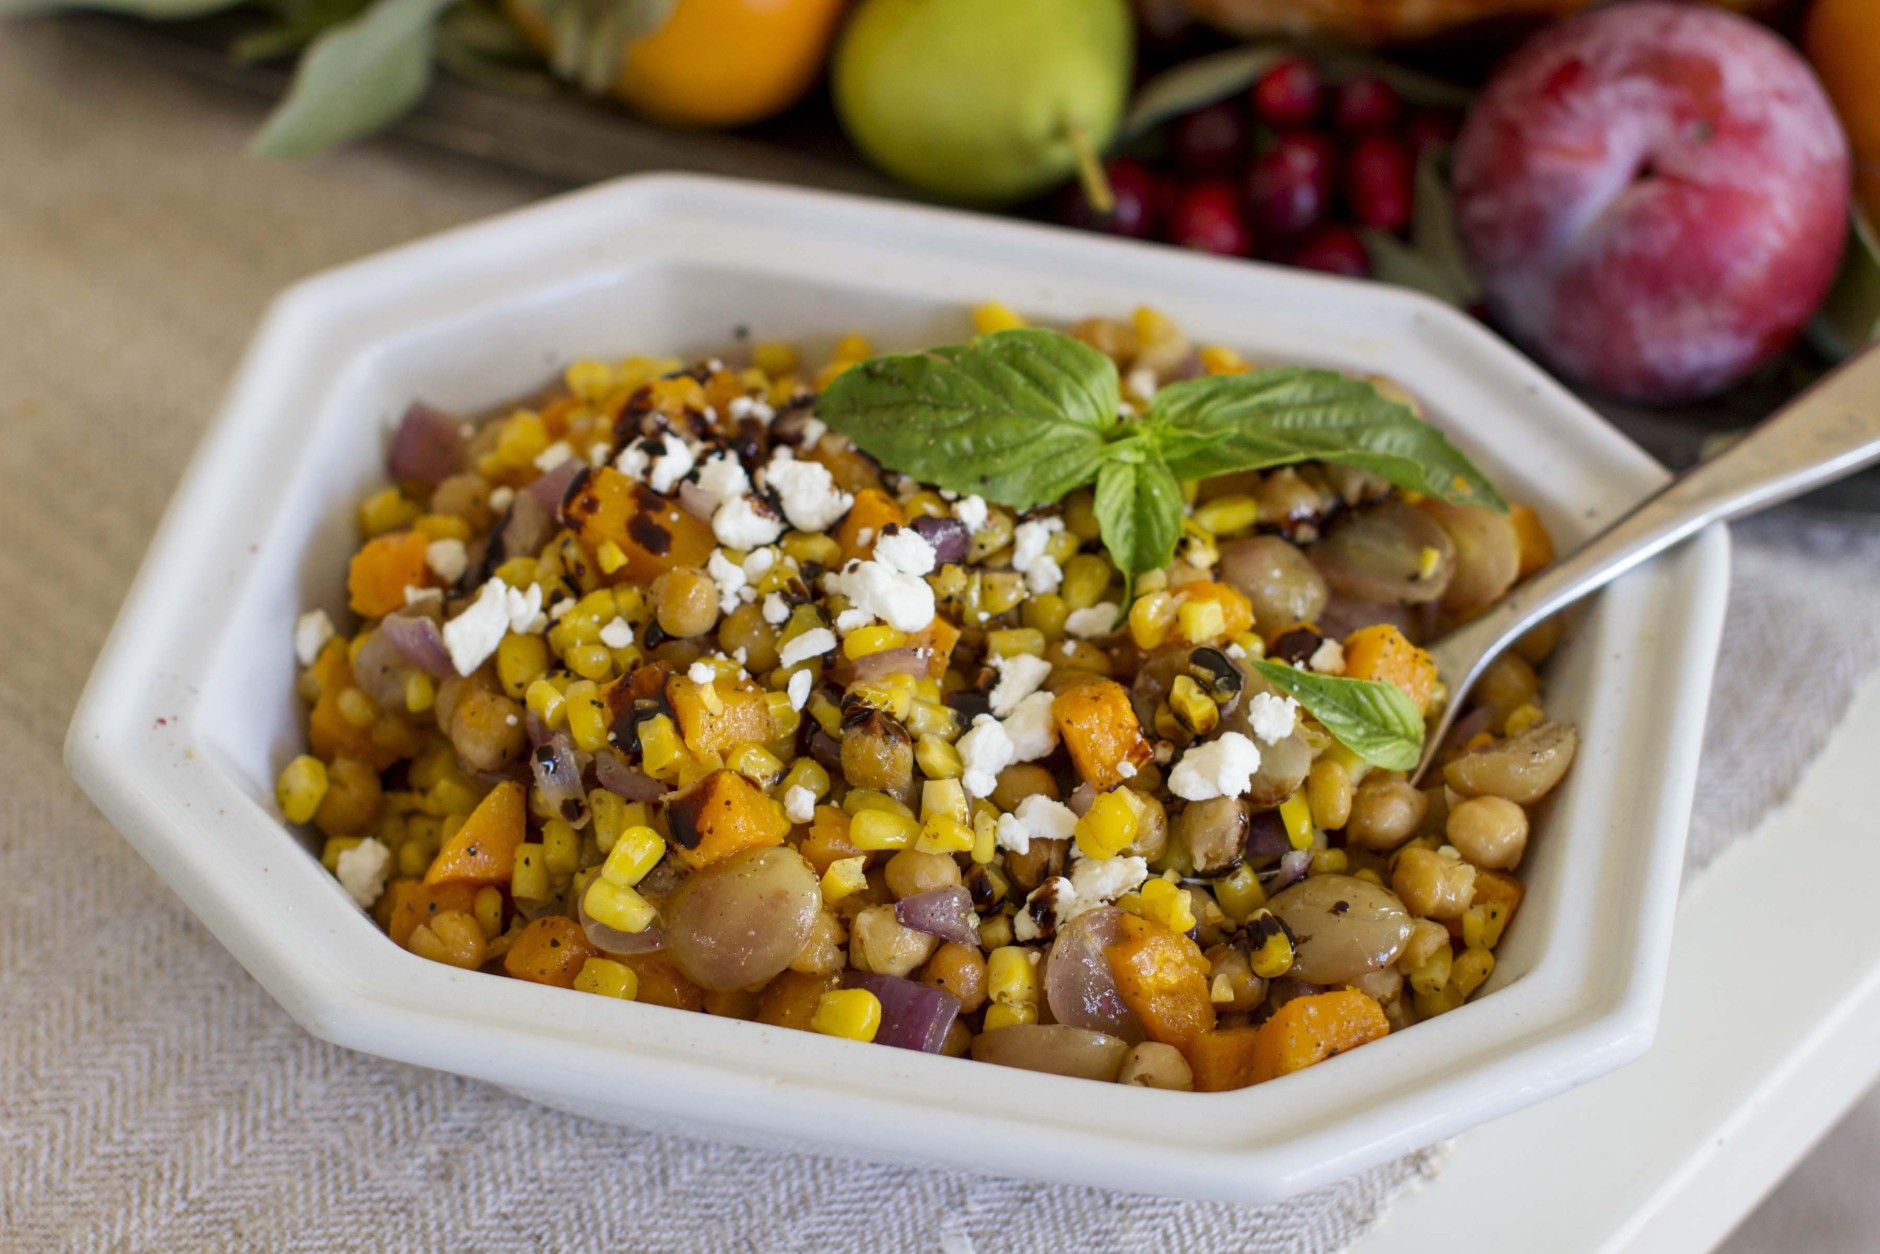 This Oct. 27, 2014, photo shows roasted grape succotash in Concord, N.H. This dish of roasted vegetables starts with classics, onion, butternut squash and corn, but mixes it up with a can of chickpeas and halved red grapes. (AP Photo/Matthew Mead)